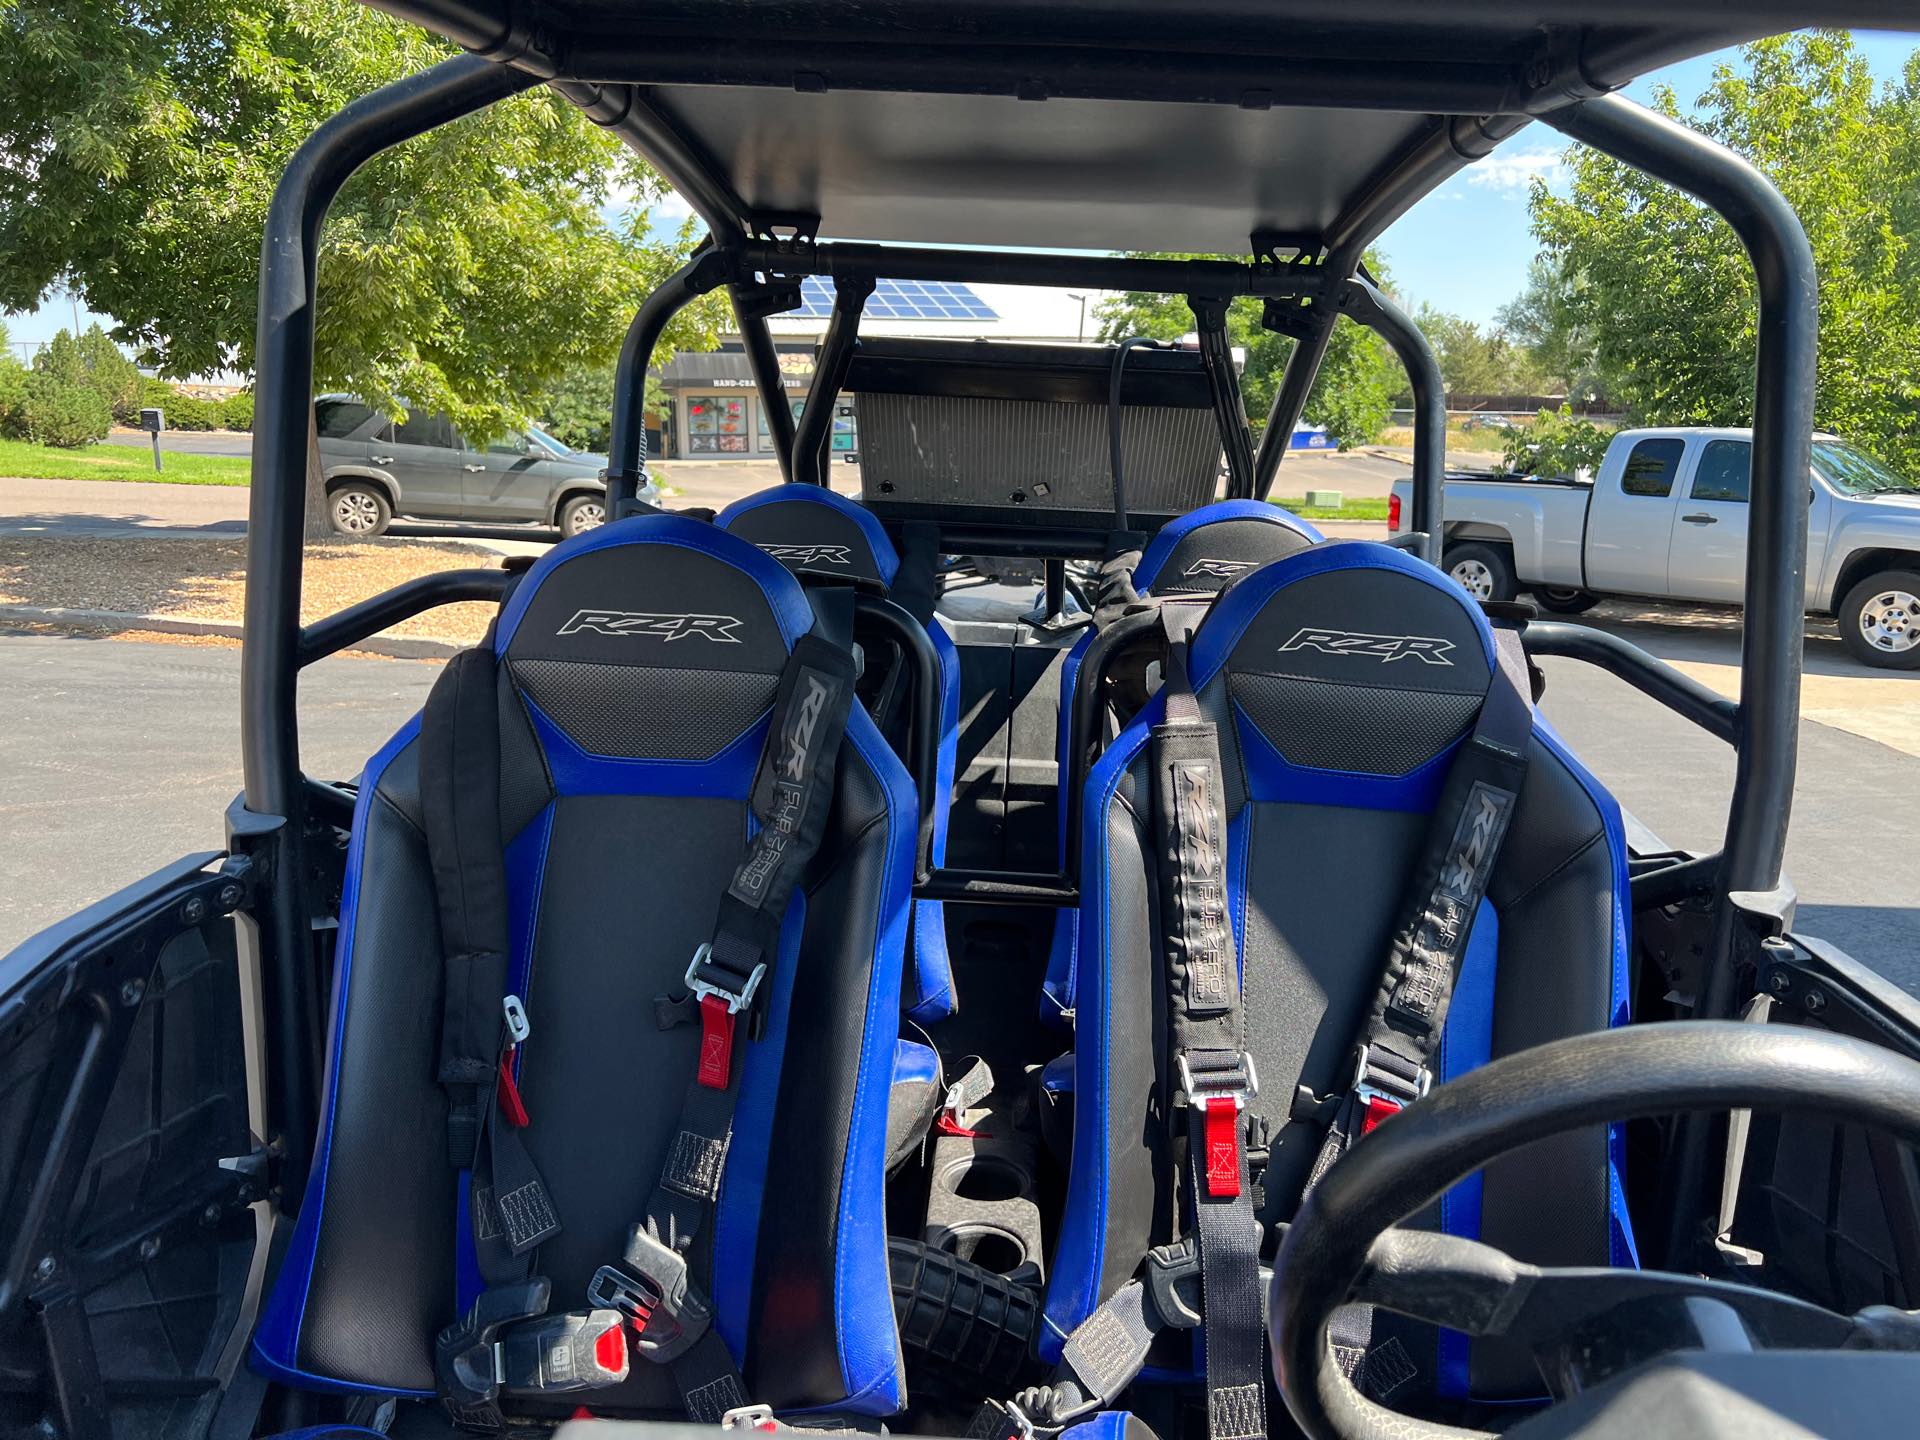 2019 Polaris RZR XP 4 Turbo S Base at Aces Motorcycles - Fort Collins